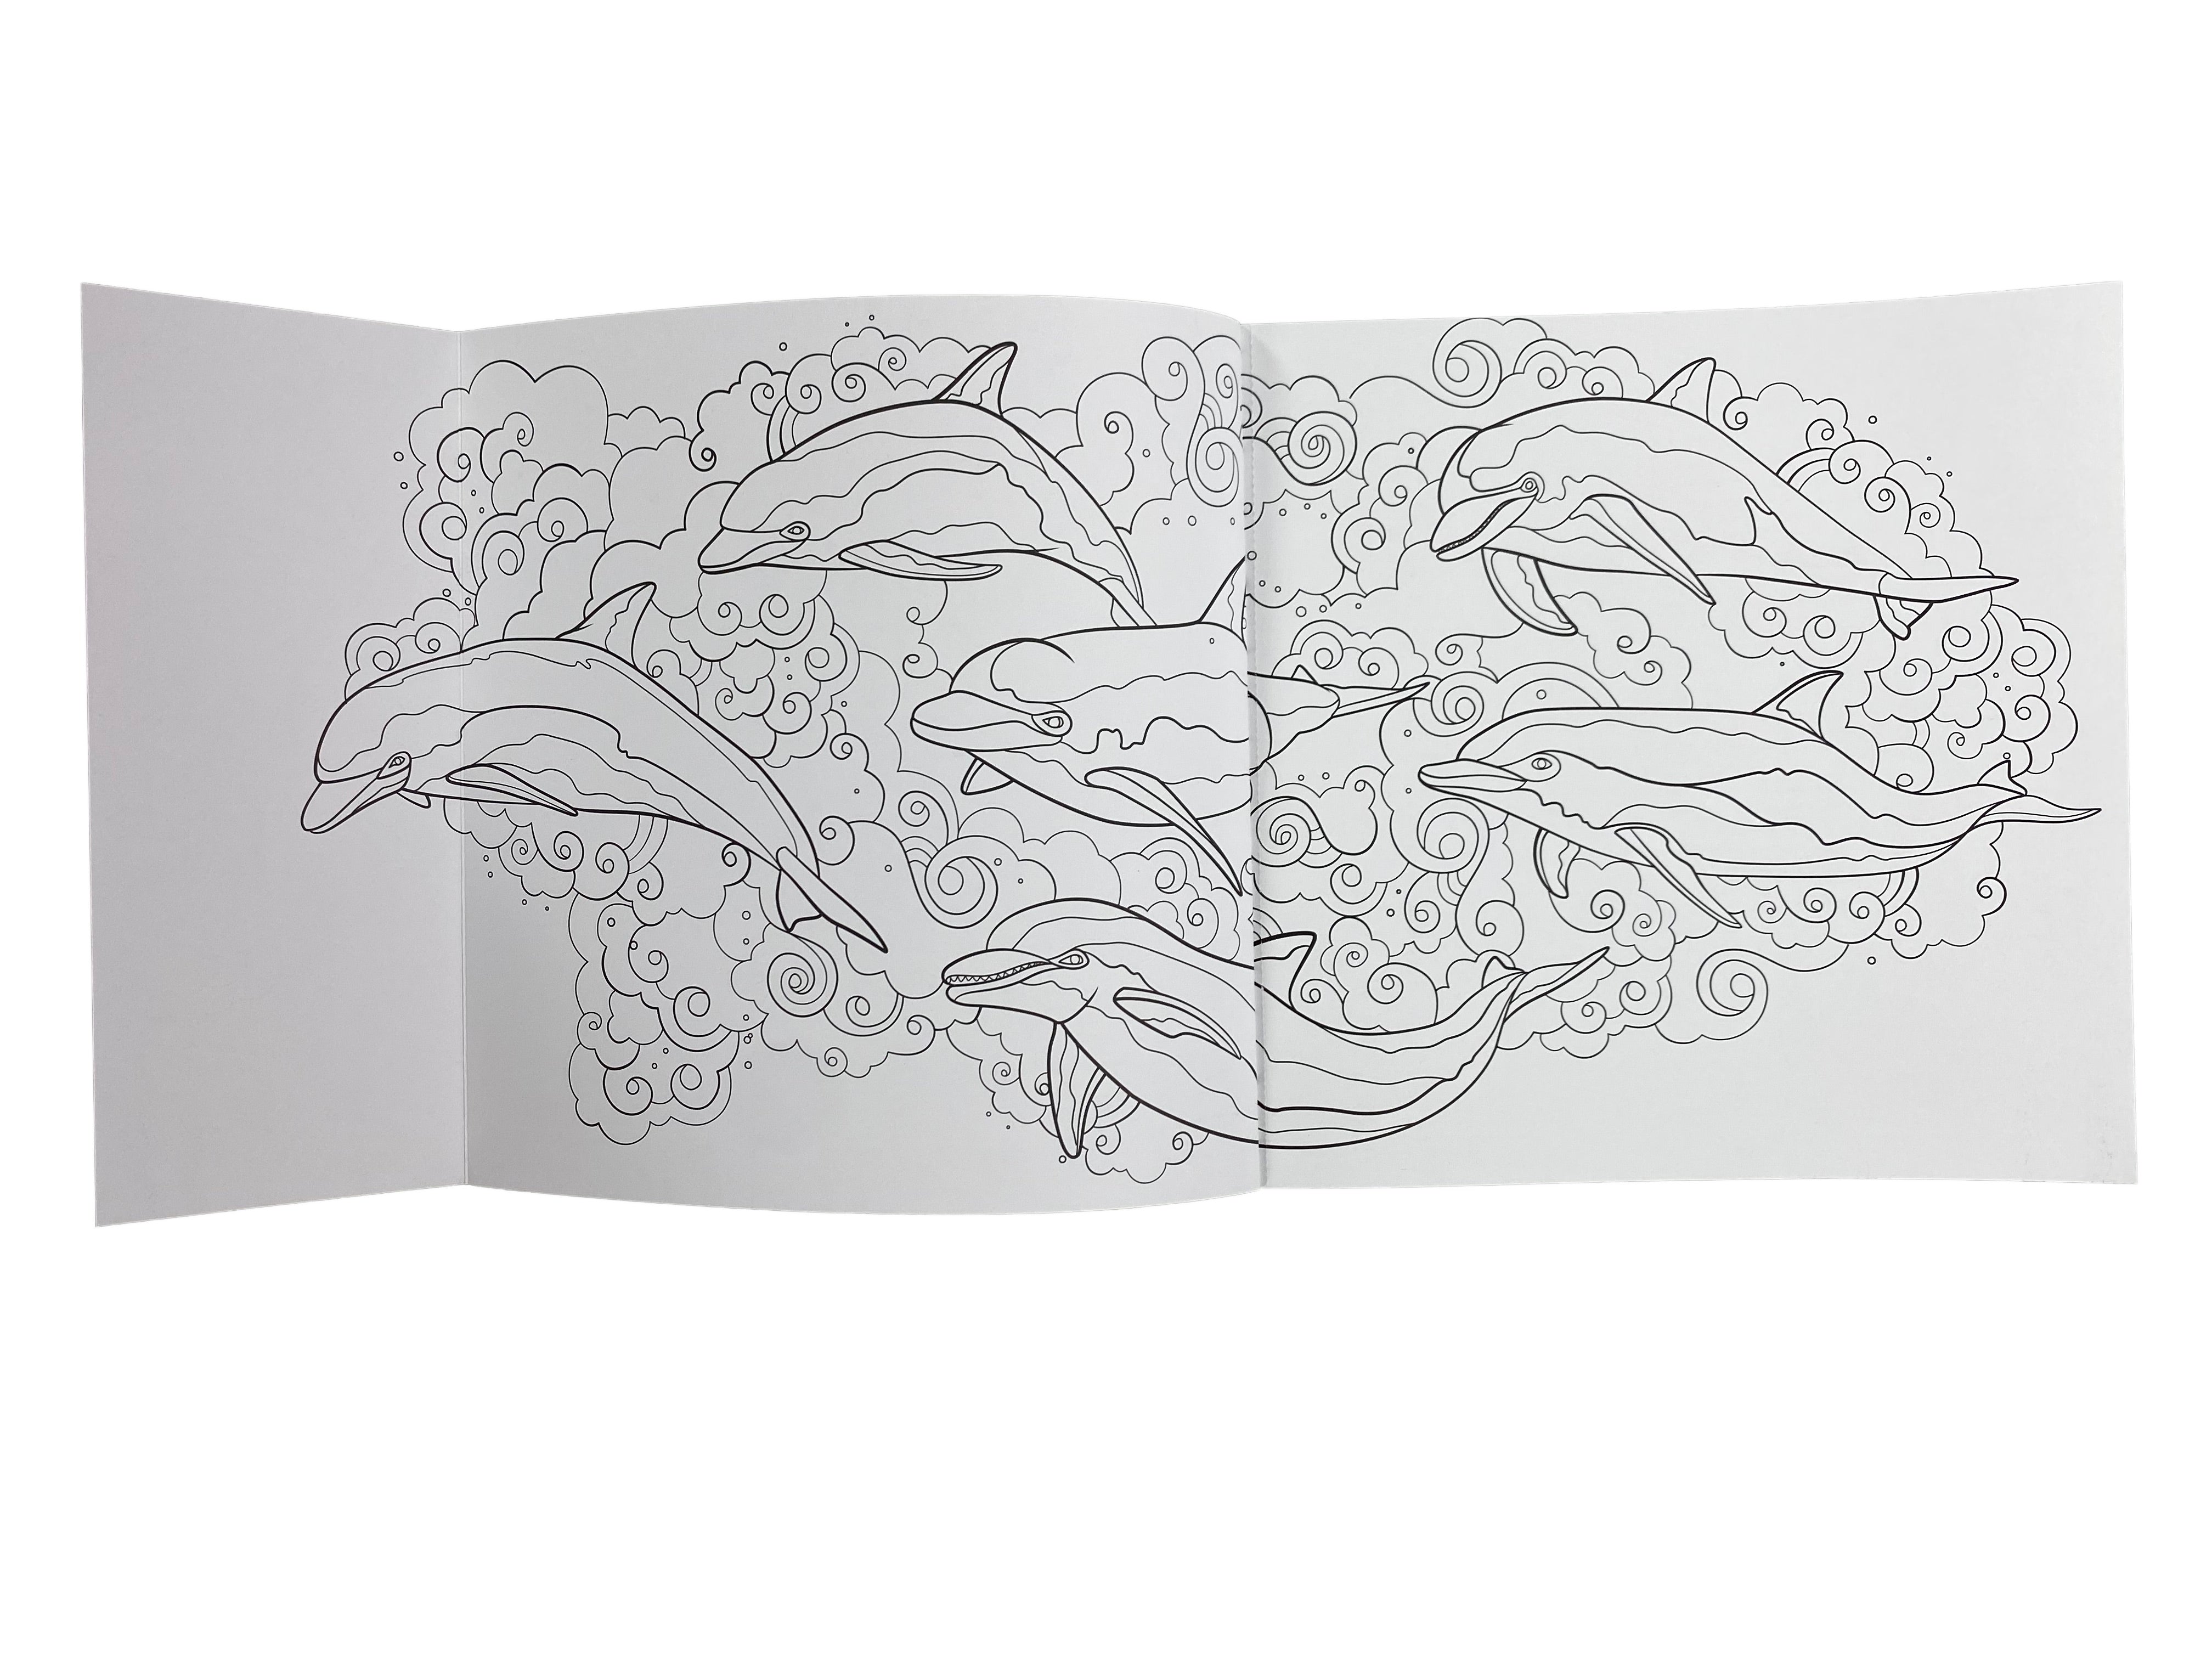 National Geographic Magnificent Ocean Coloring Book    